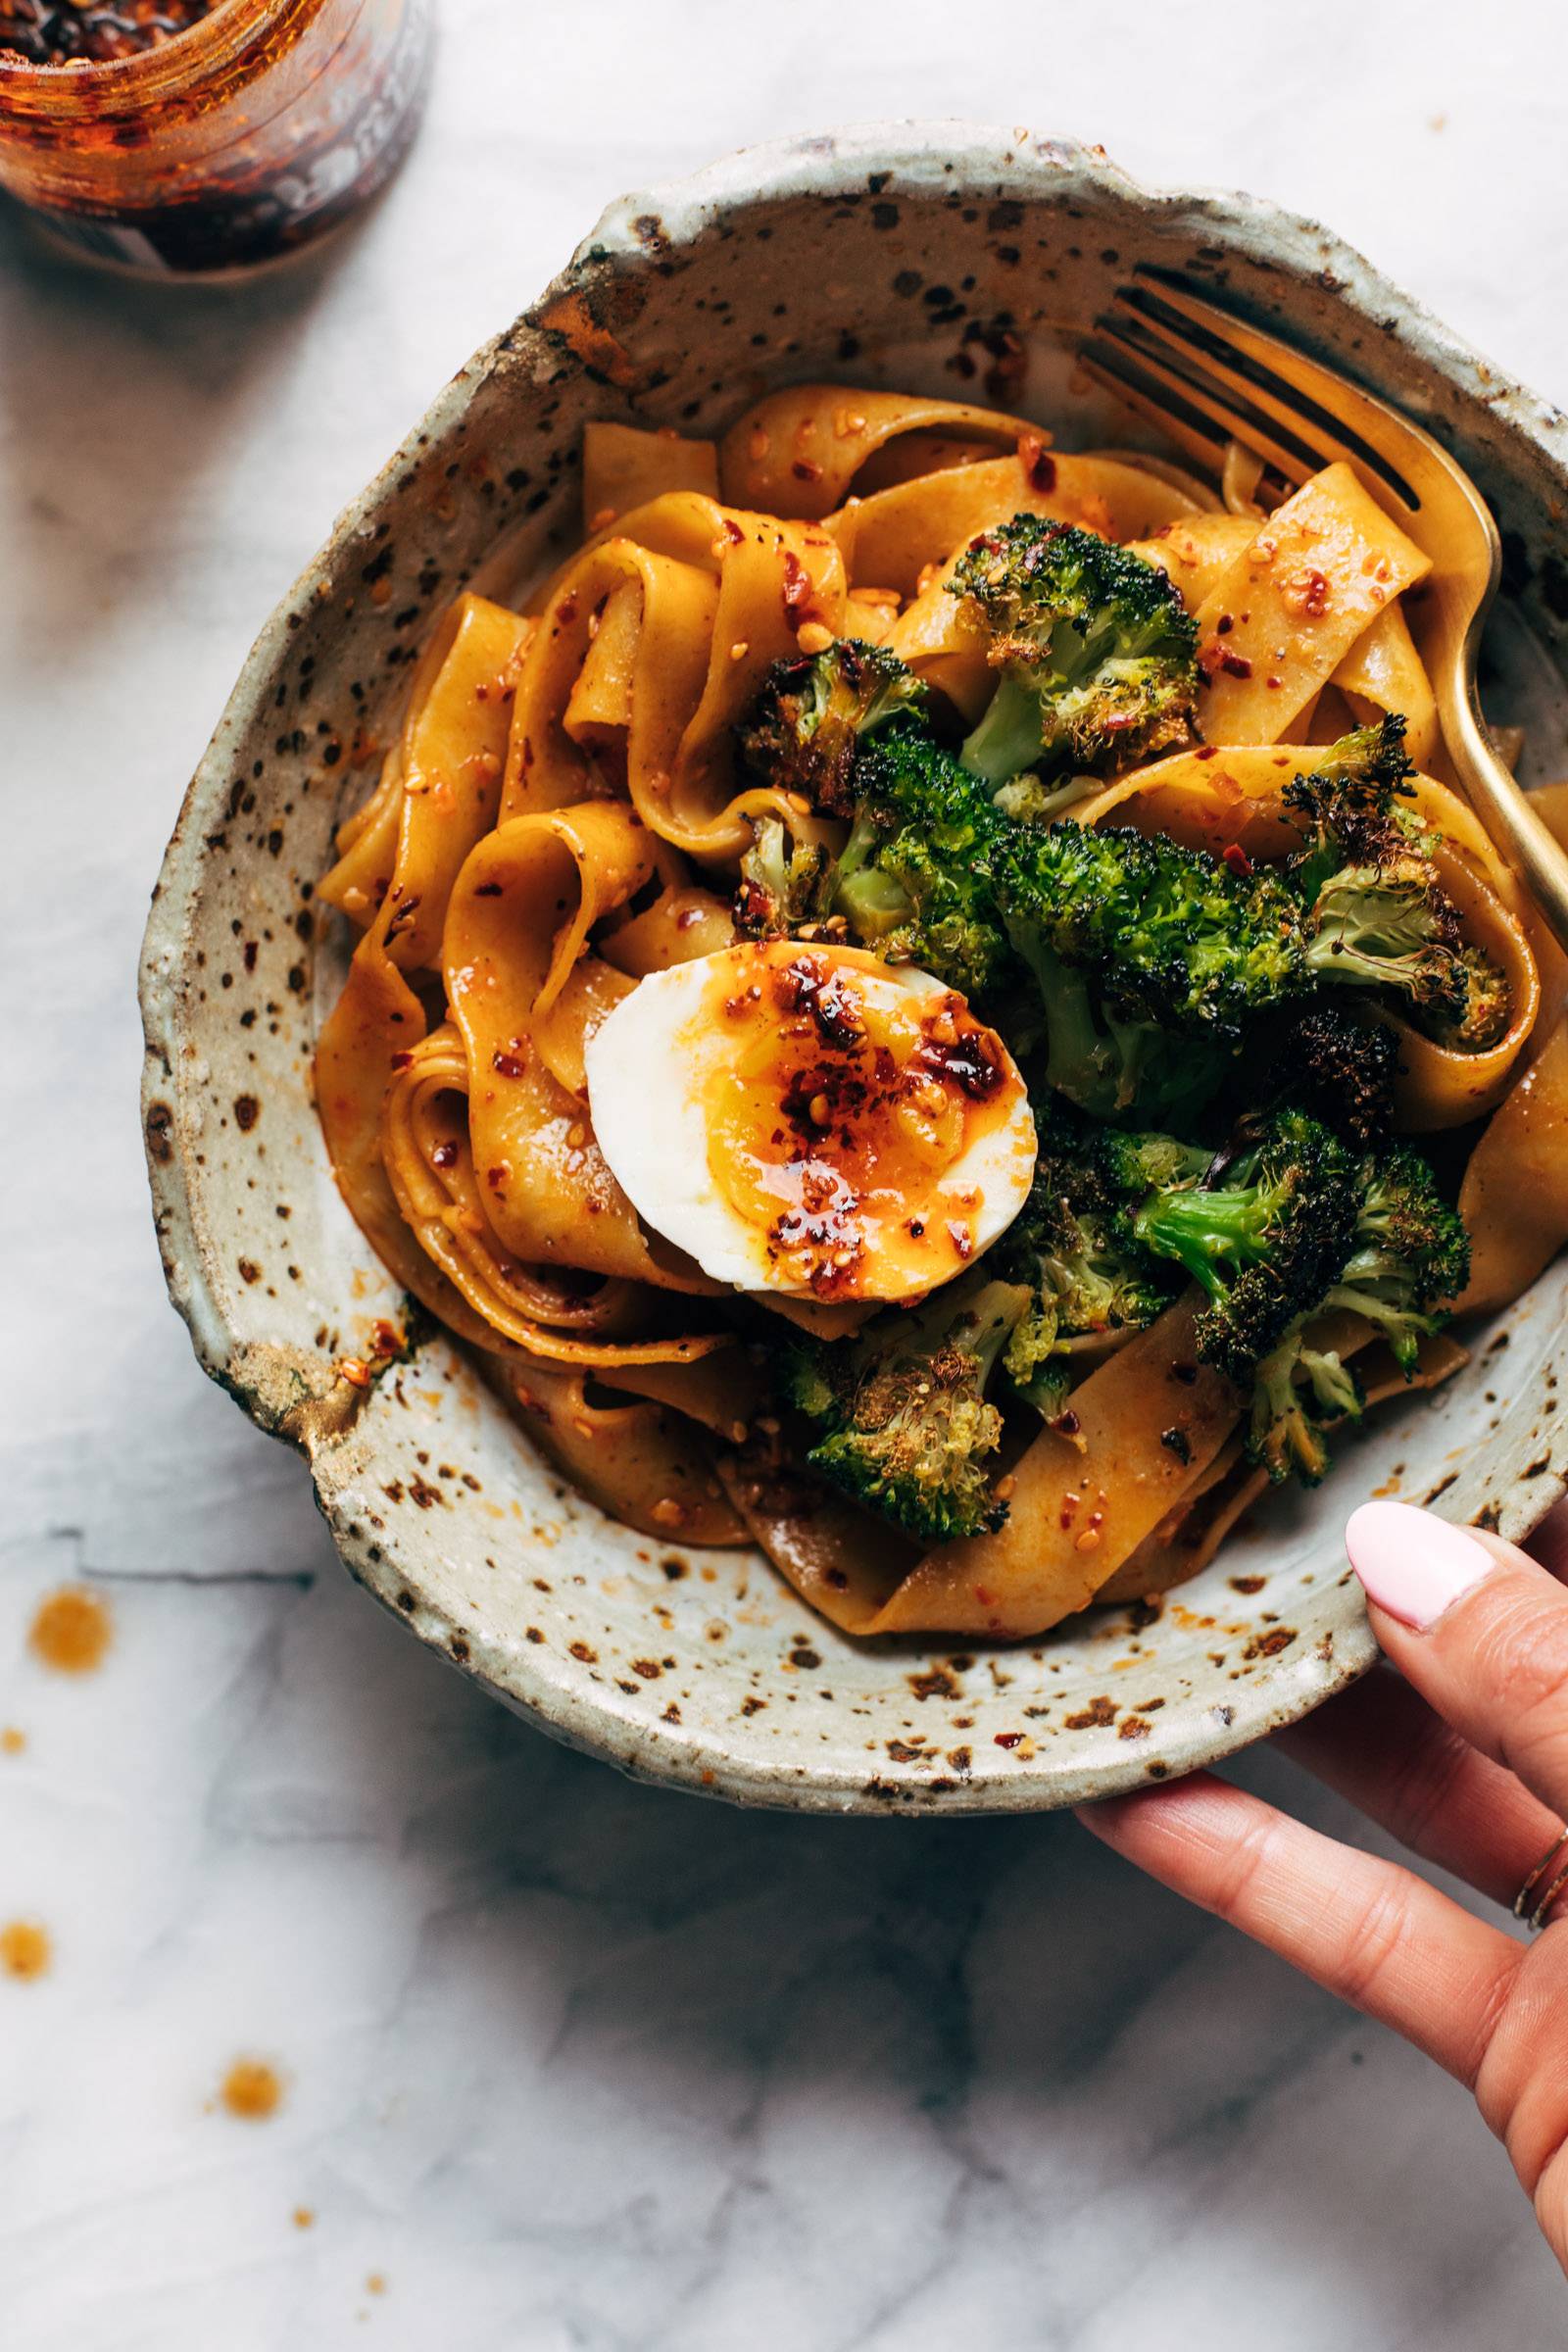 Chili garlic oil noodles with soft boiled egg and broccolini on top